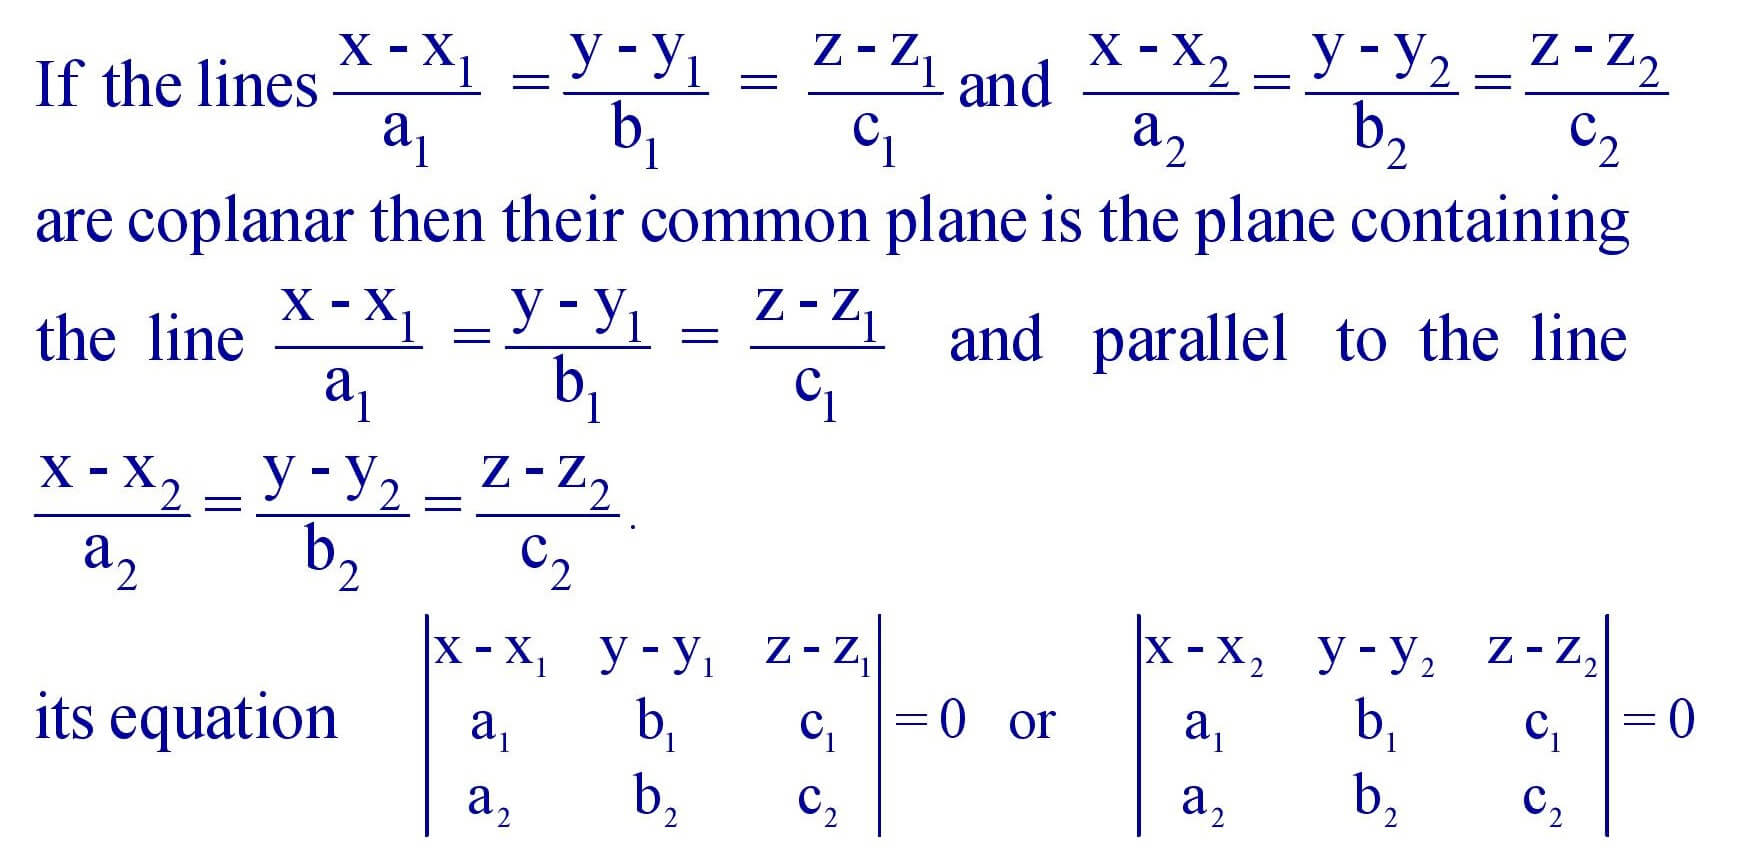 Condition for the Coplanarity of two lines